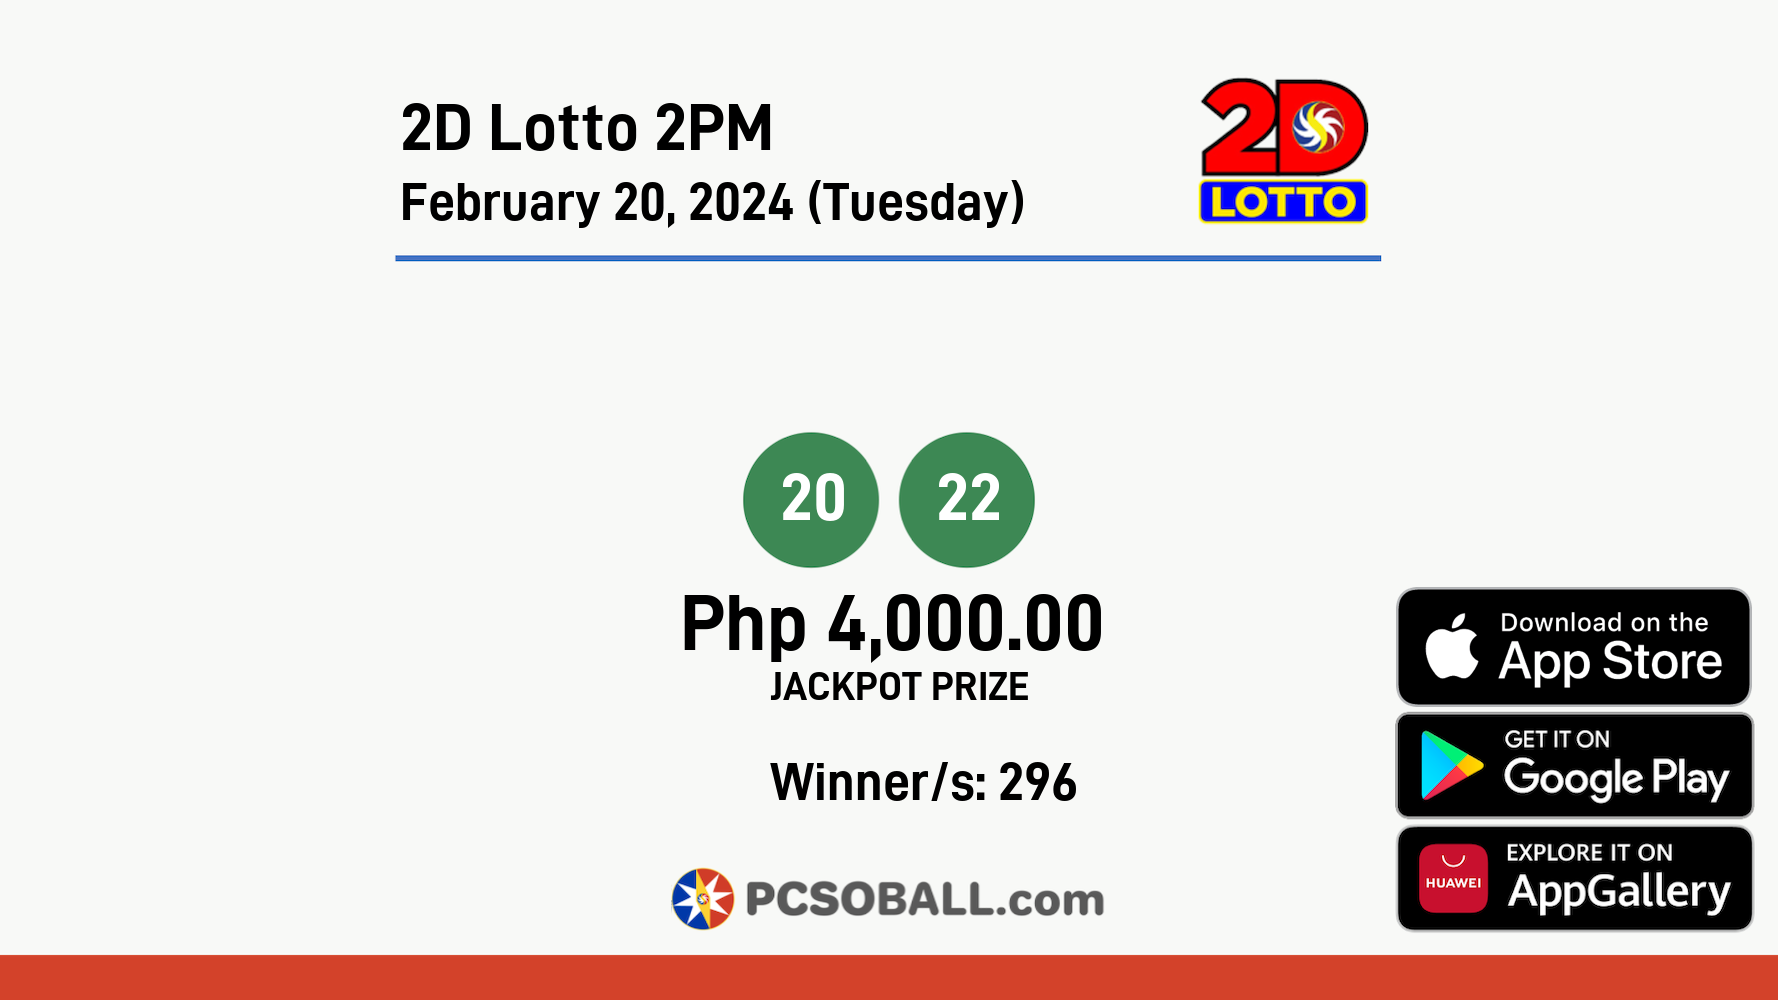 2D Lotto 2PM February 20, 2024 (Tuesday) Result